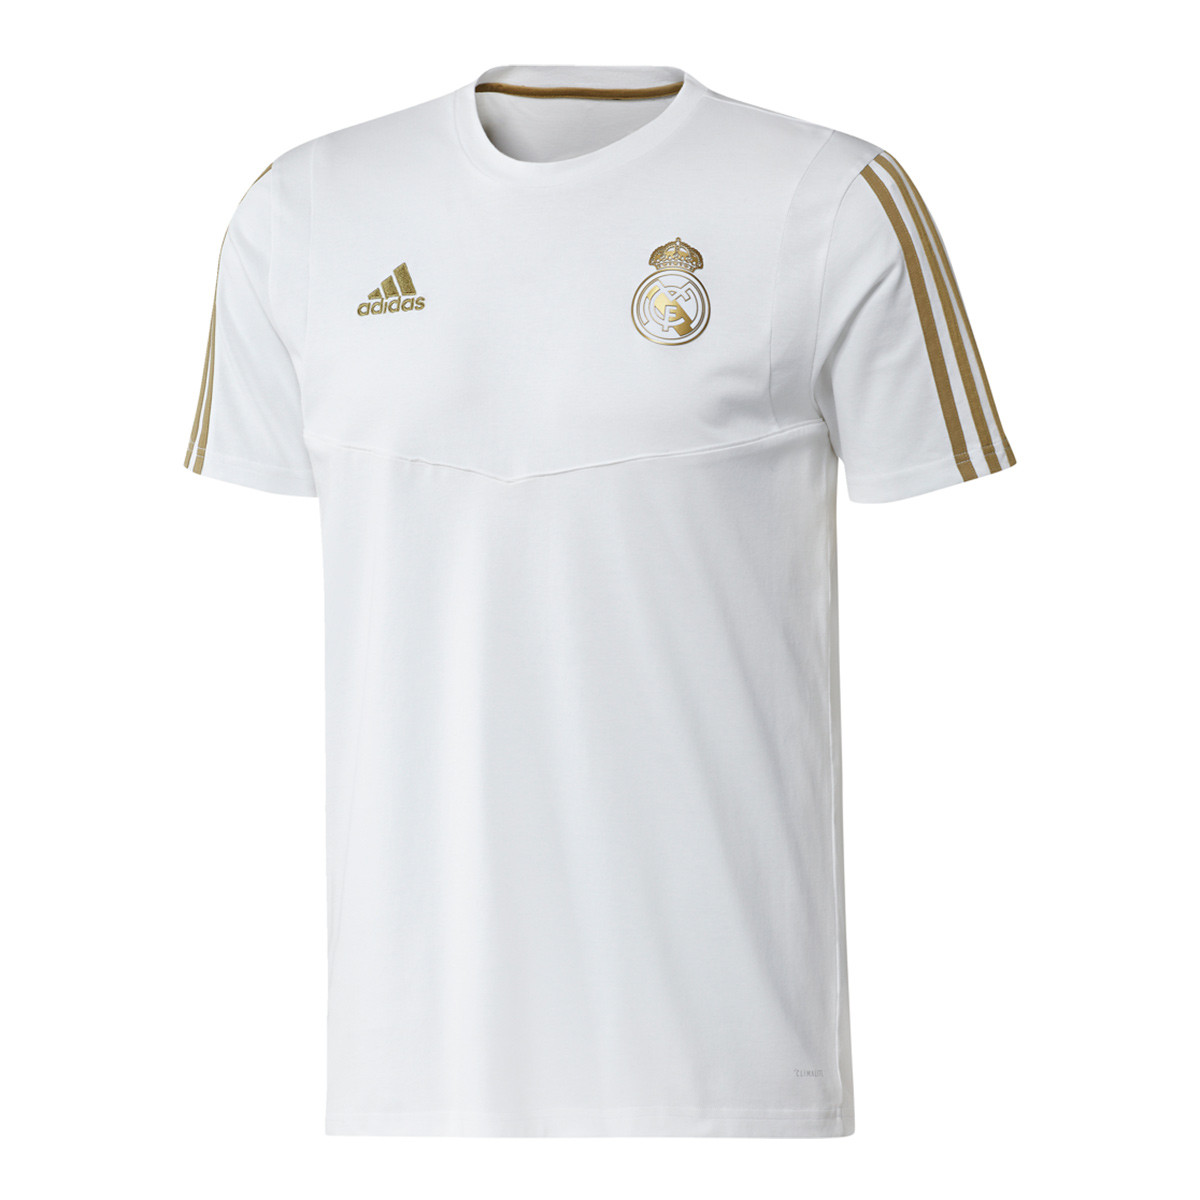 white and gold real madrid jersey